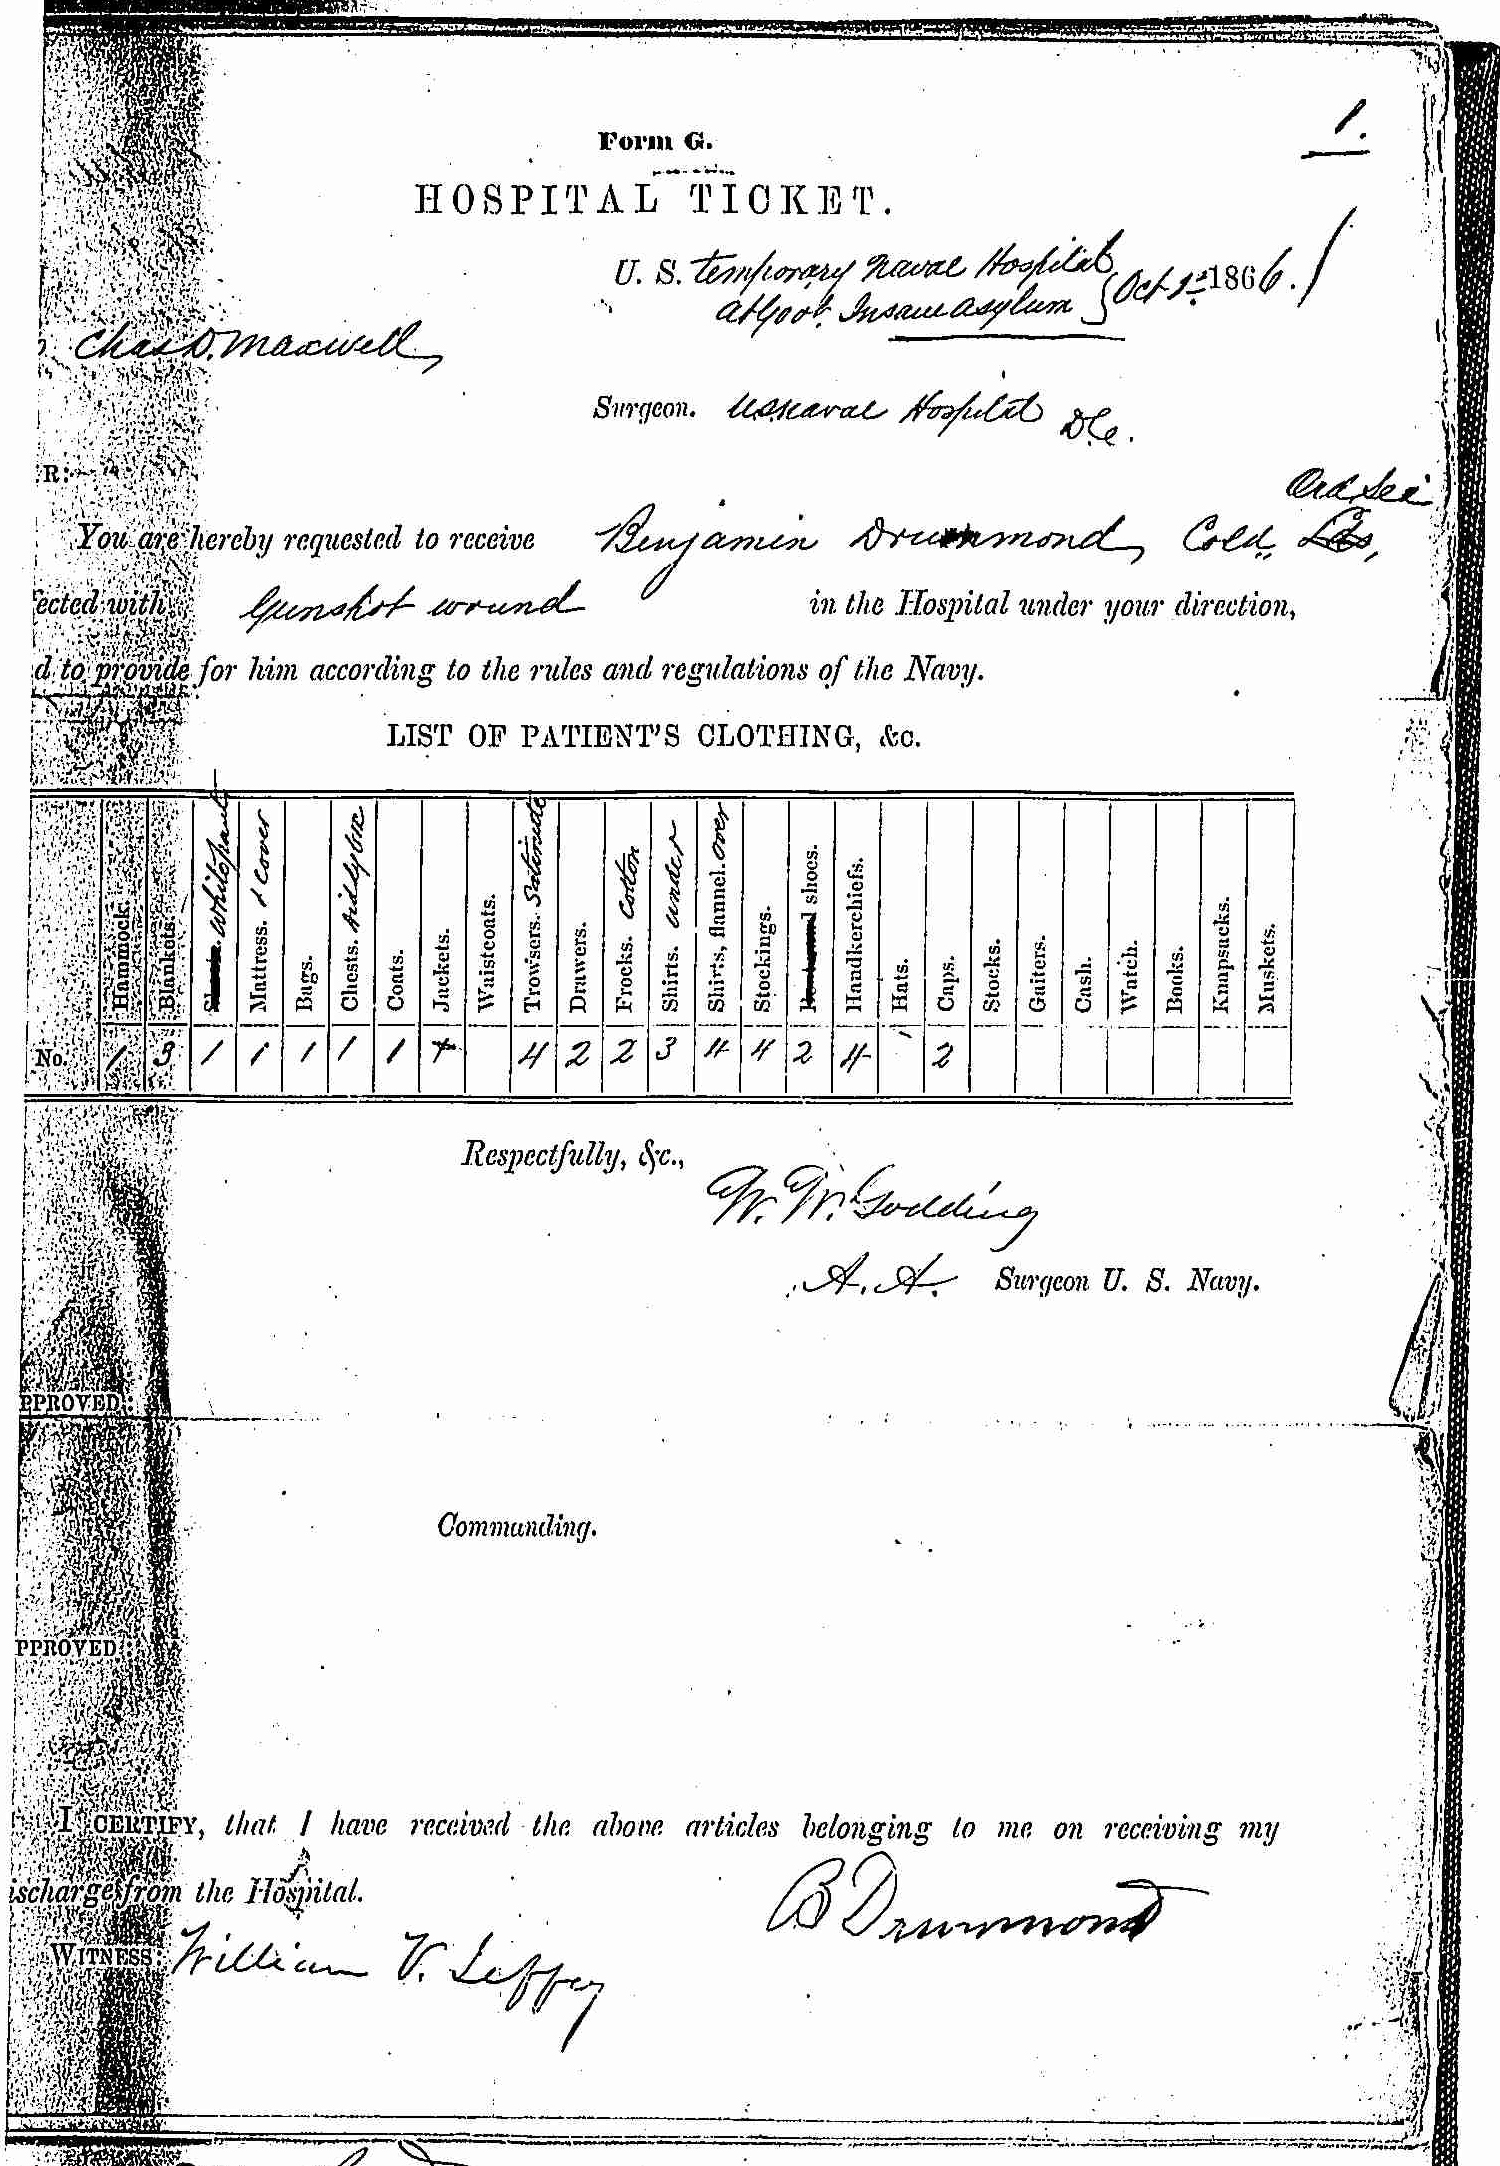 Entry for Benjamin Drummond (page 1 of 2) in the log Hospital Tickets and Case Papers - Naval Hospital - Washington, D.C. - 1866-68